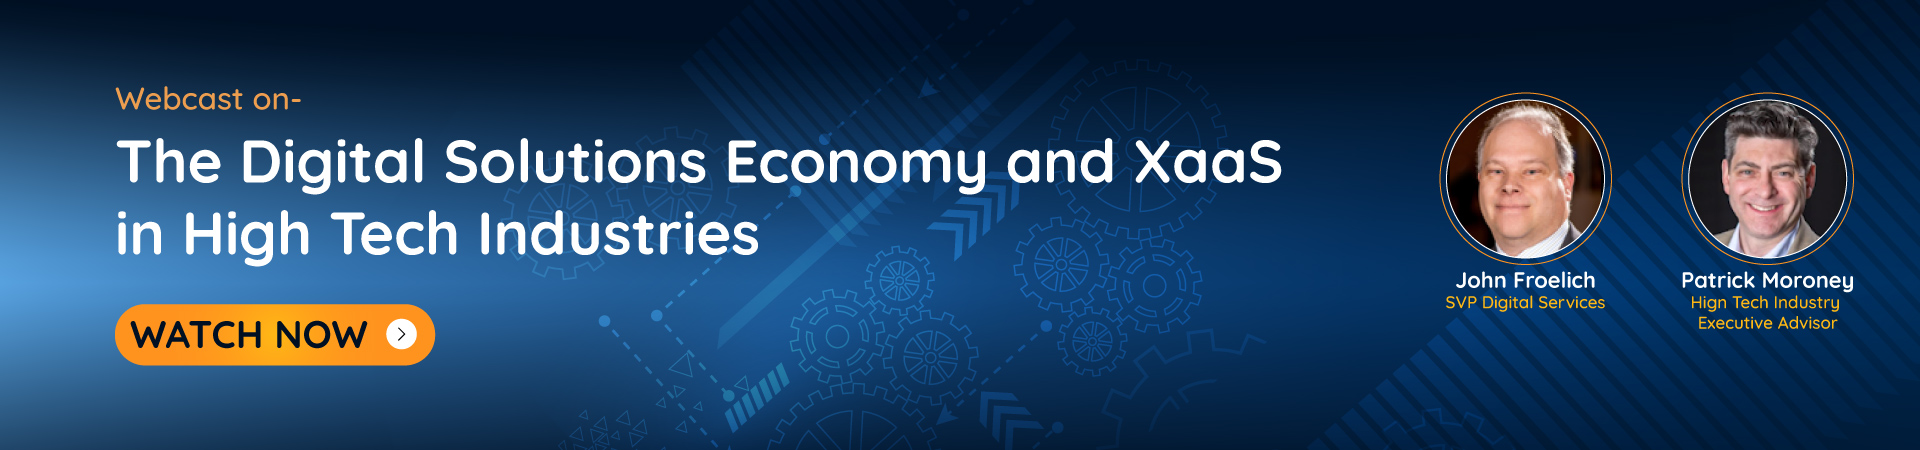 The Digital Solutions Economy and XaaS in High Tech Industries